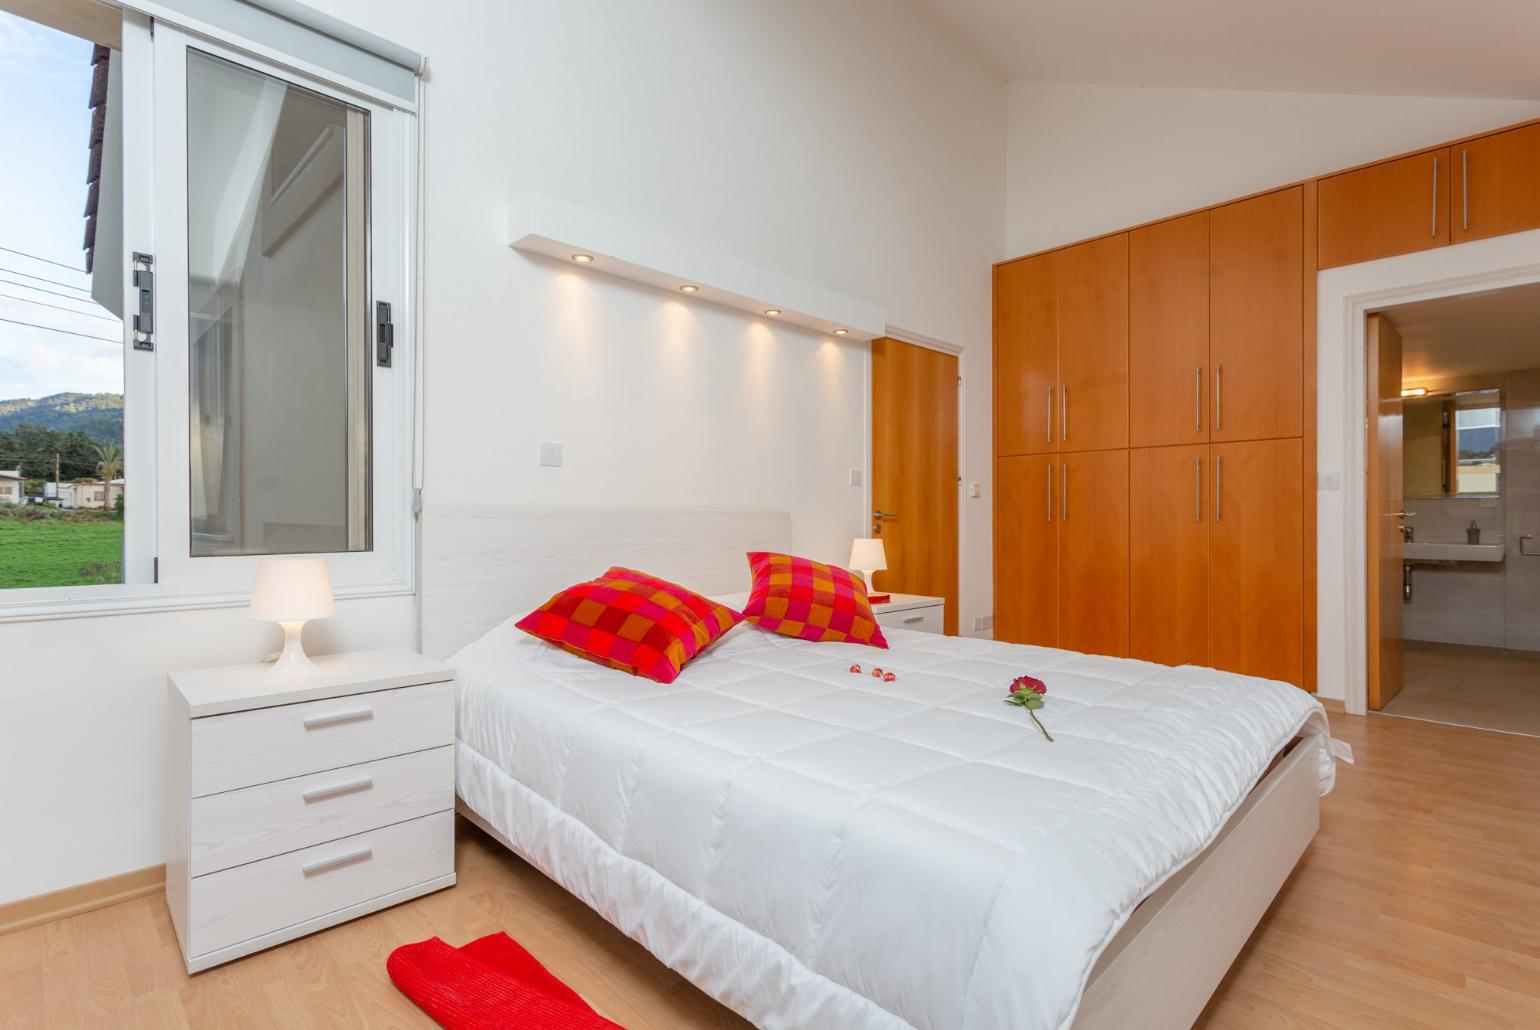 Double bedroom with en suite bathroom, A/C, panoramic sea views, and balcony access